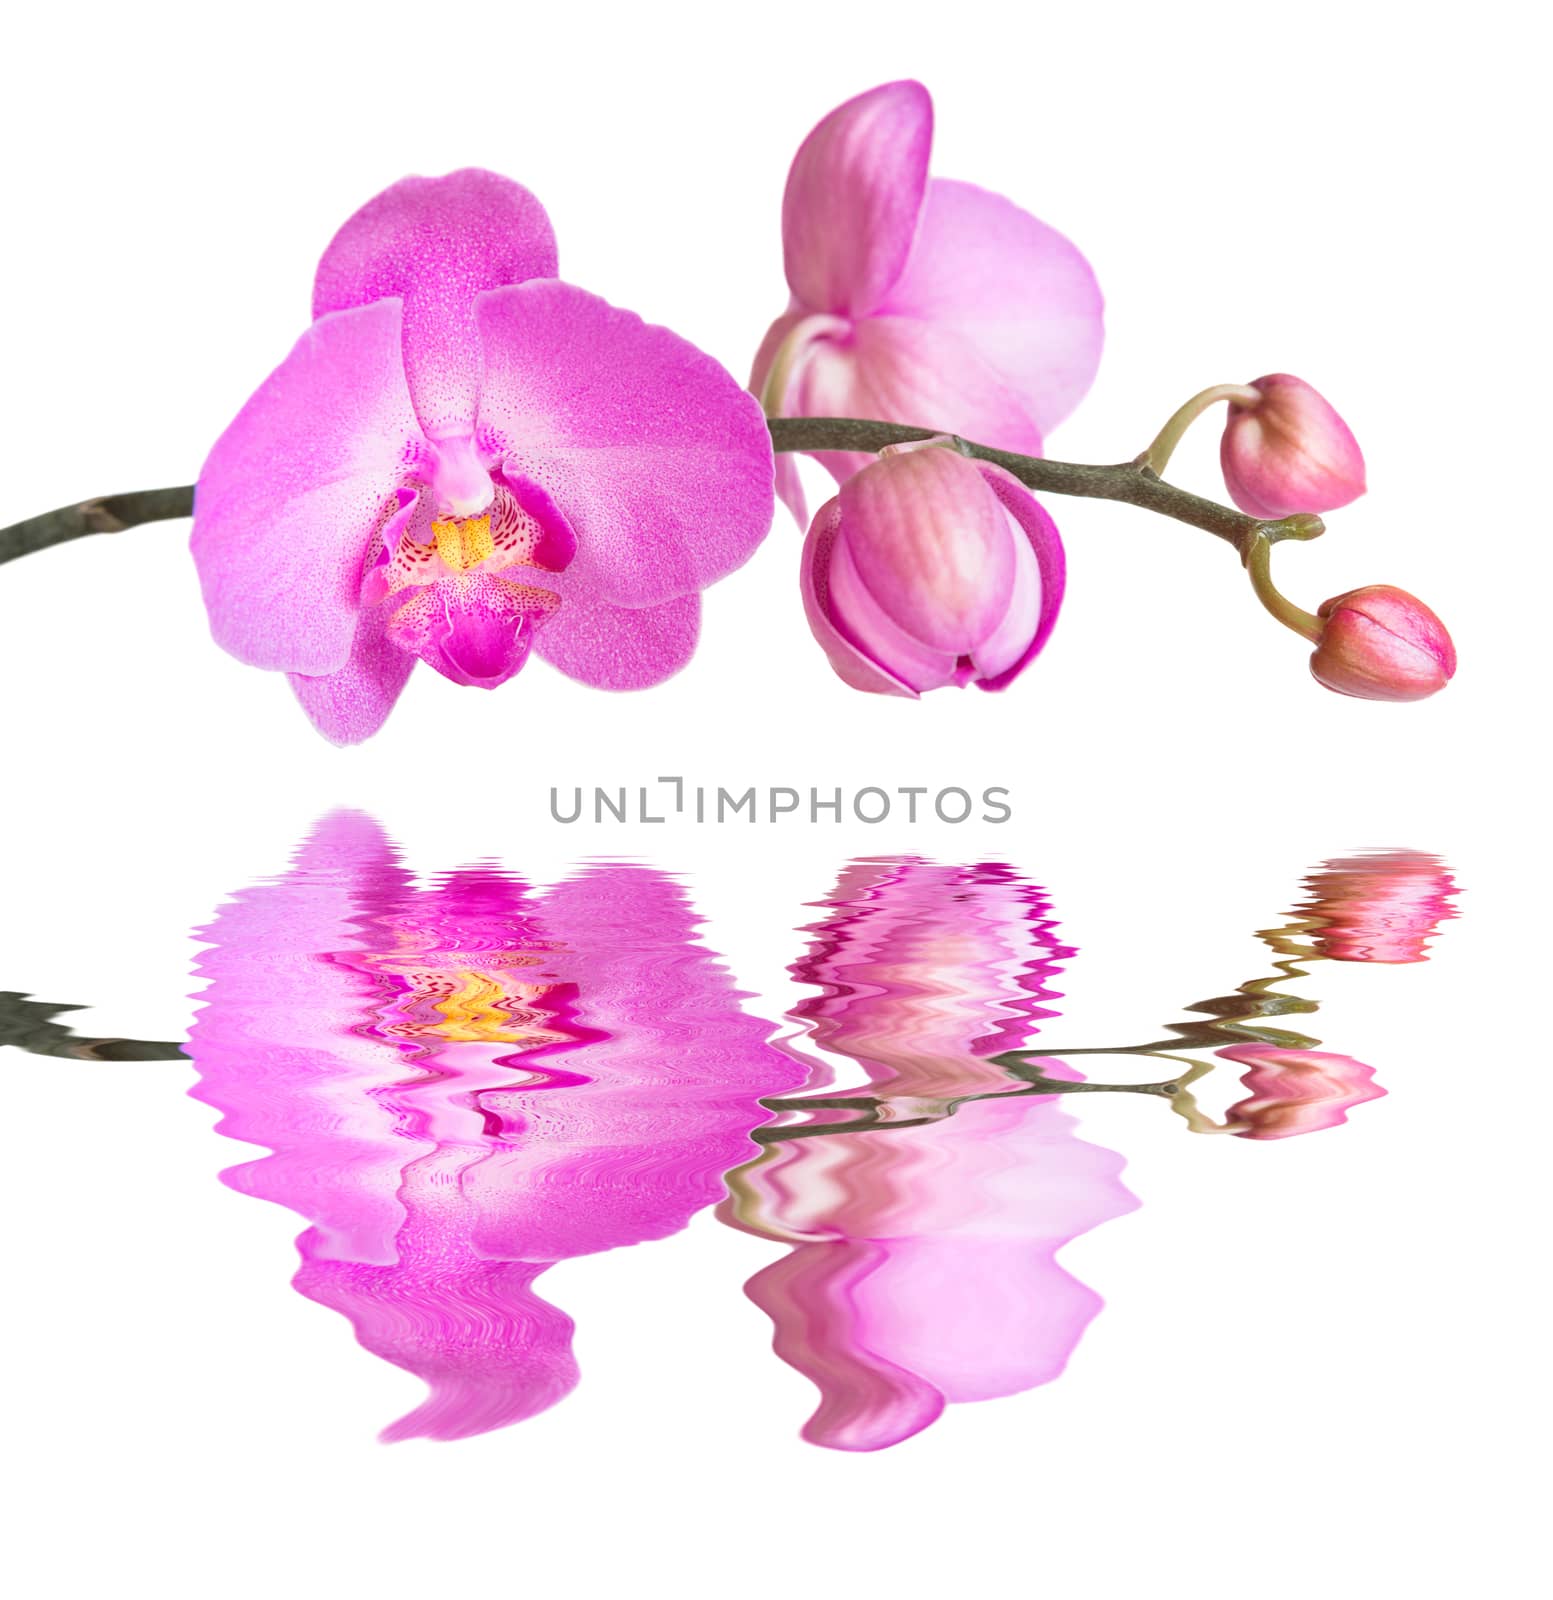 Purple phalaenopsis orchid flowes isolated on white background, close-up, reflected in a water surface with small waves